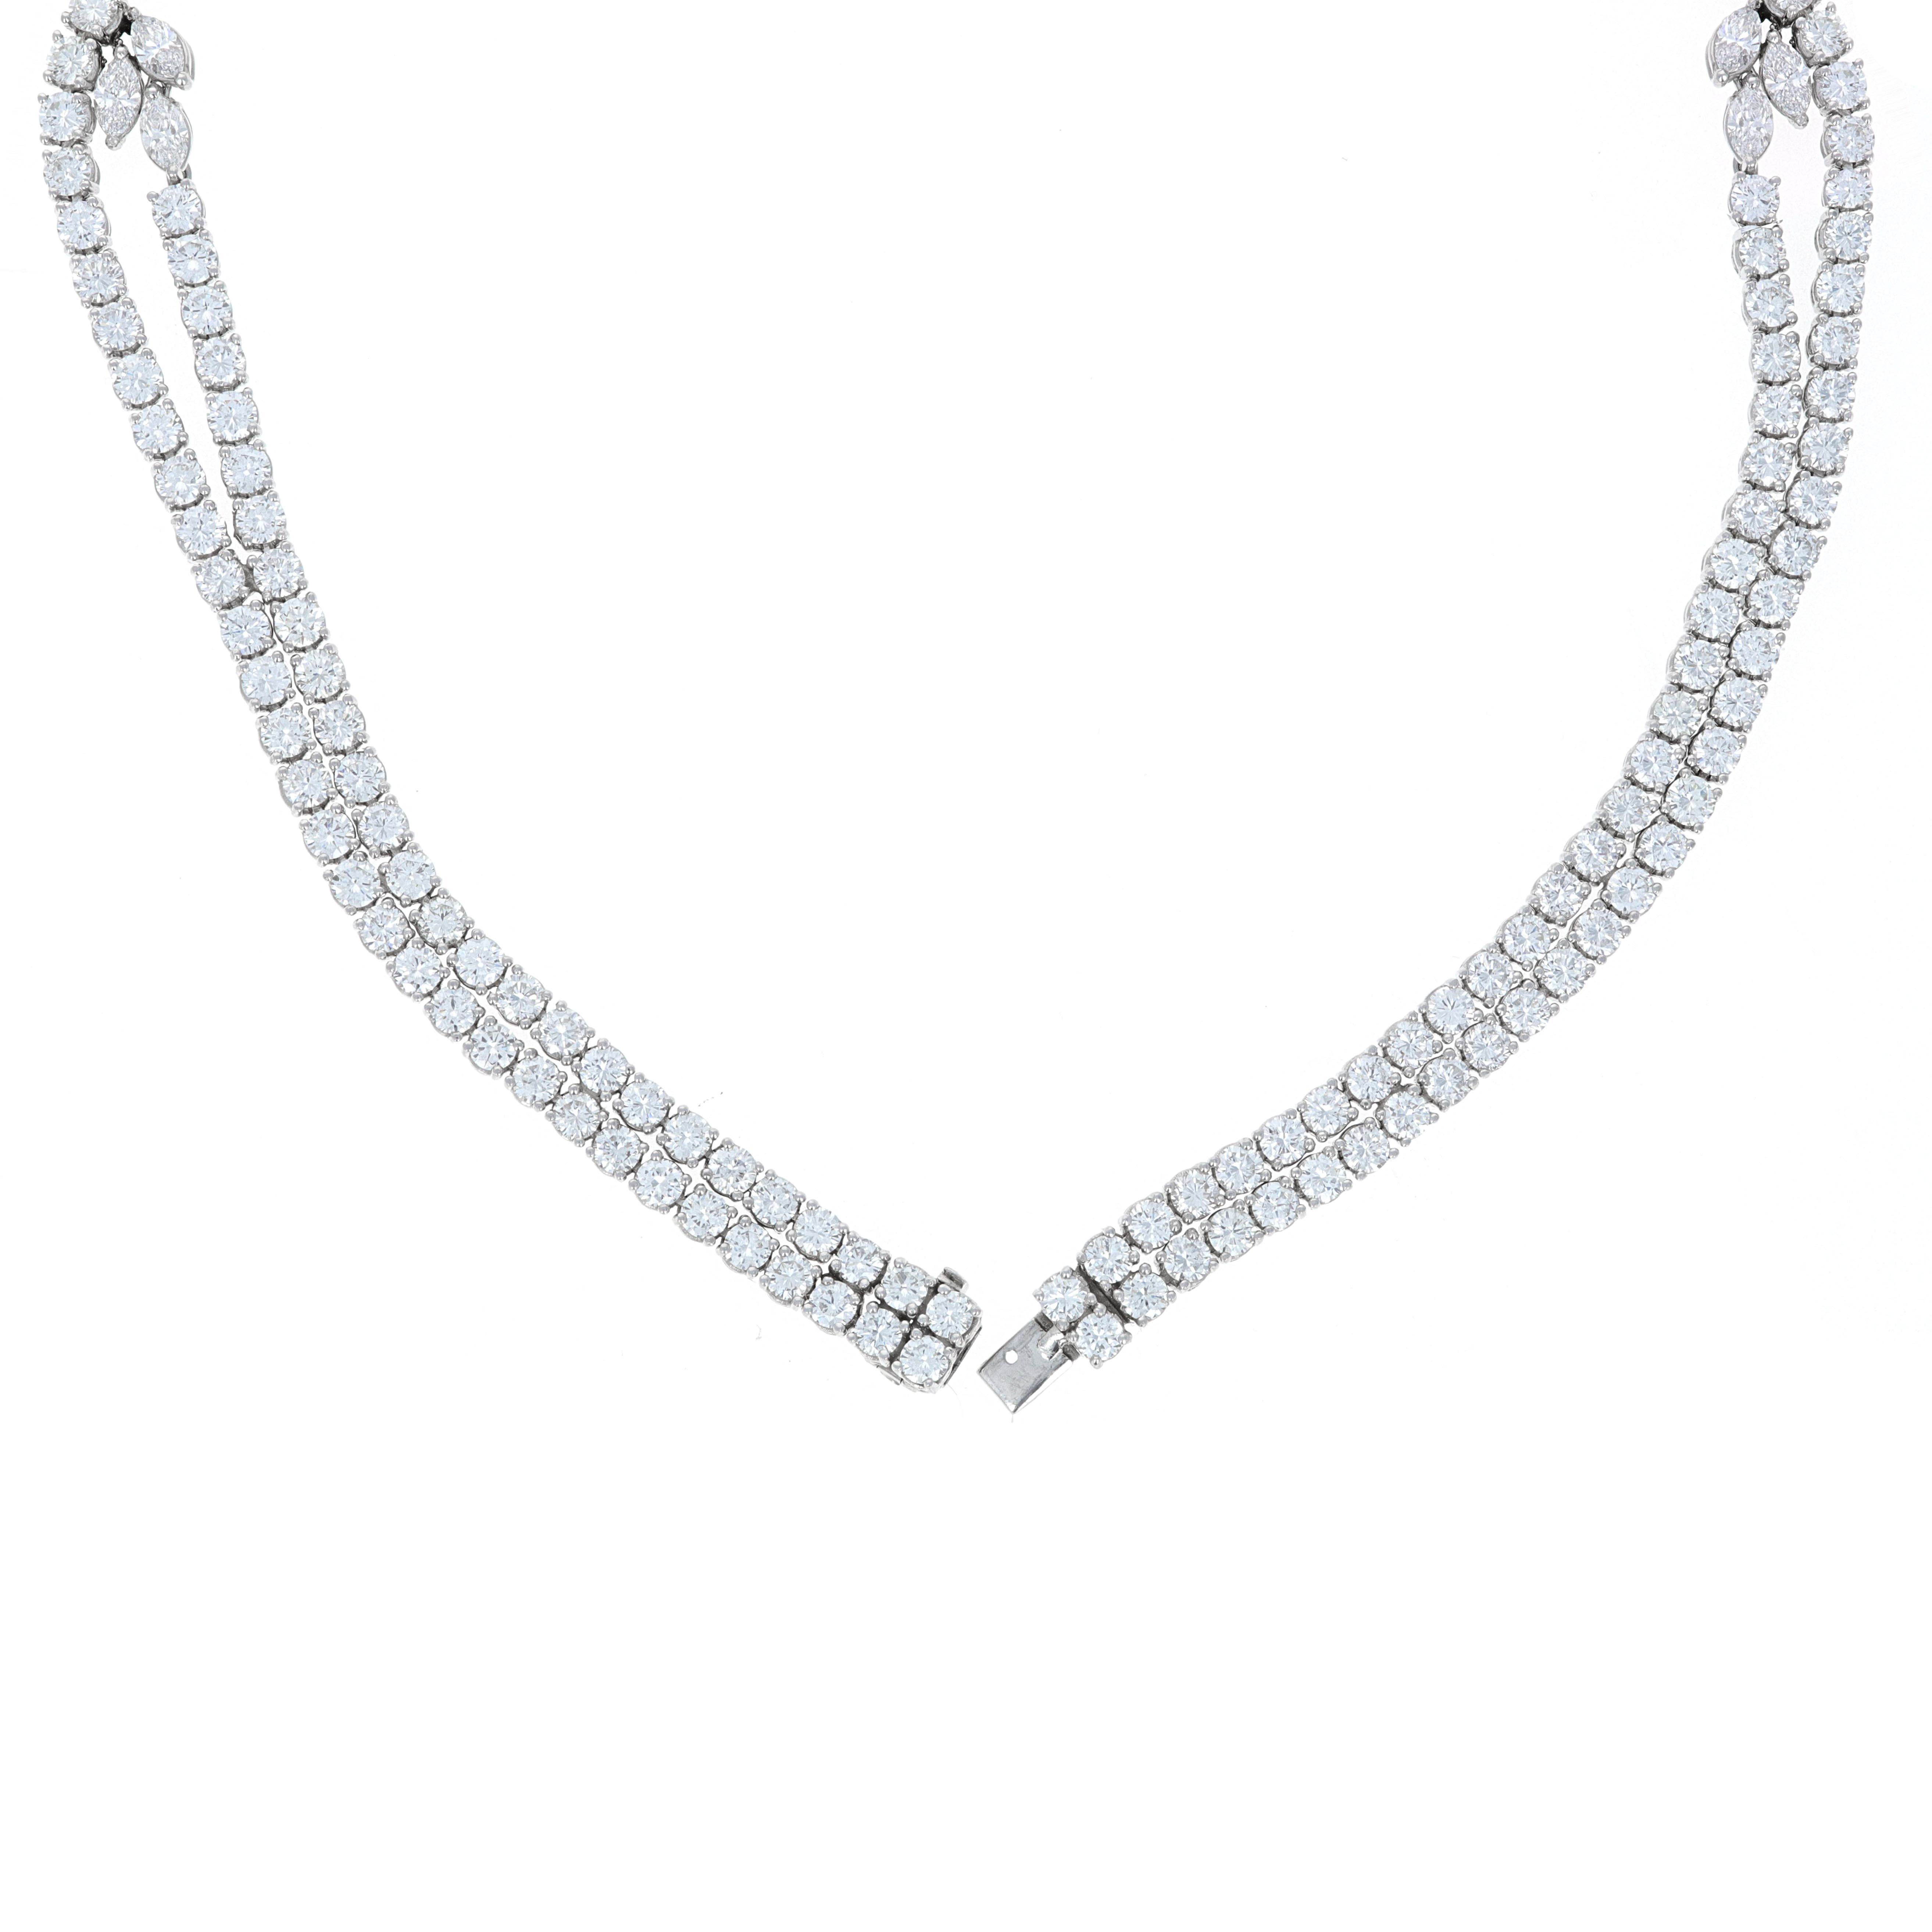 Round Cut 54.25 Carat Total Weight Diamond and Pearl Necklace, Earring and Ring Set